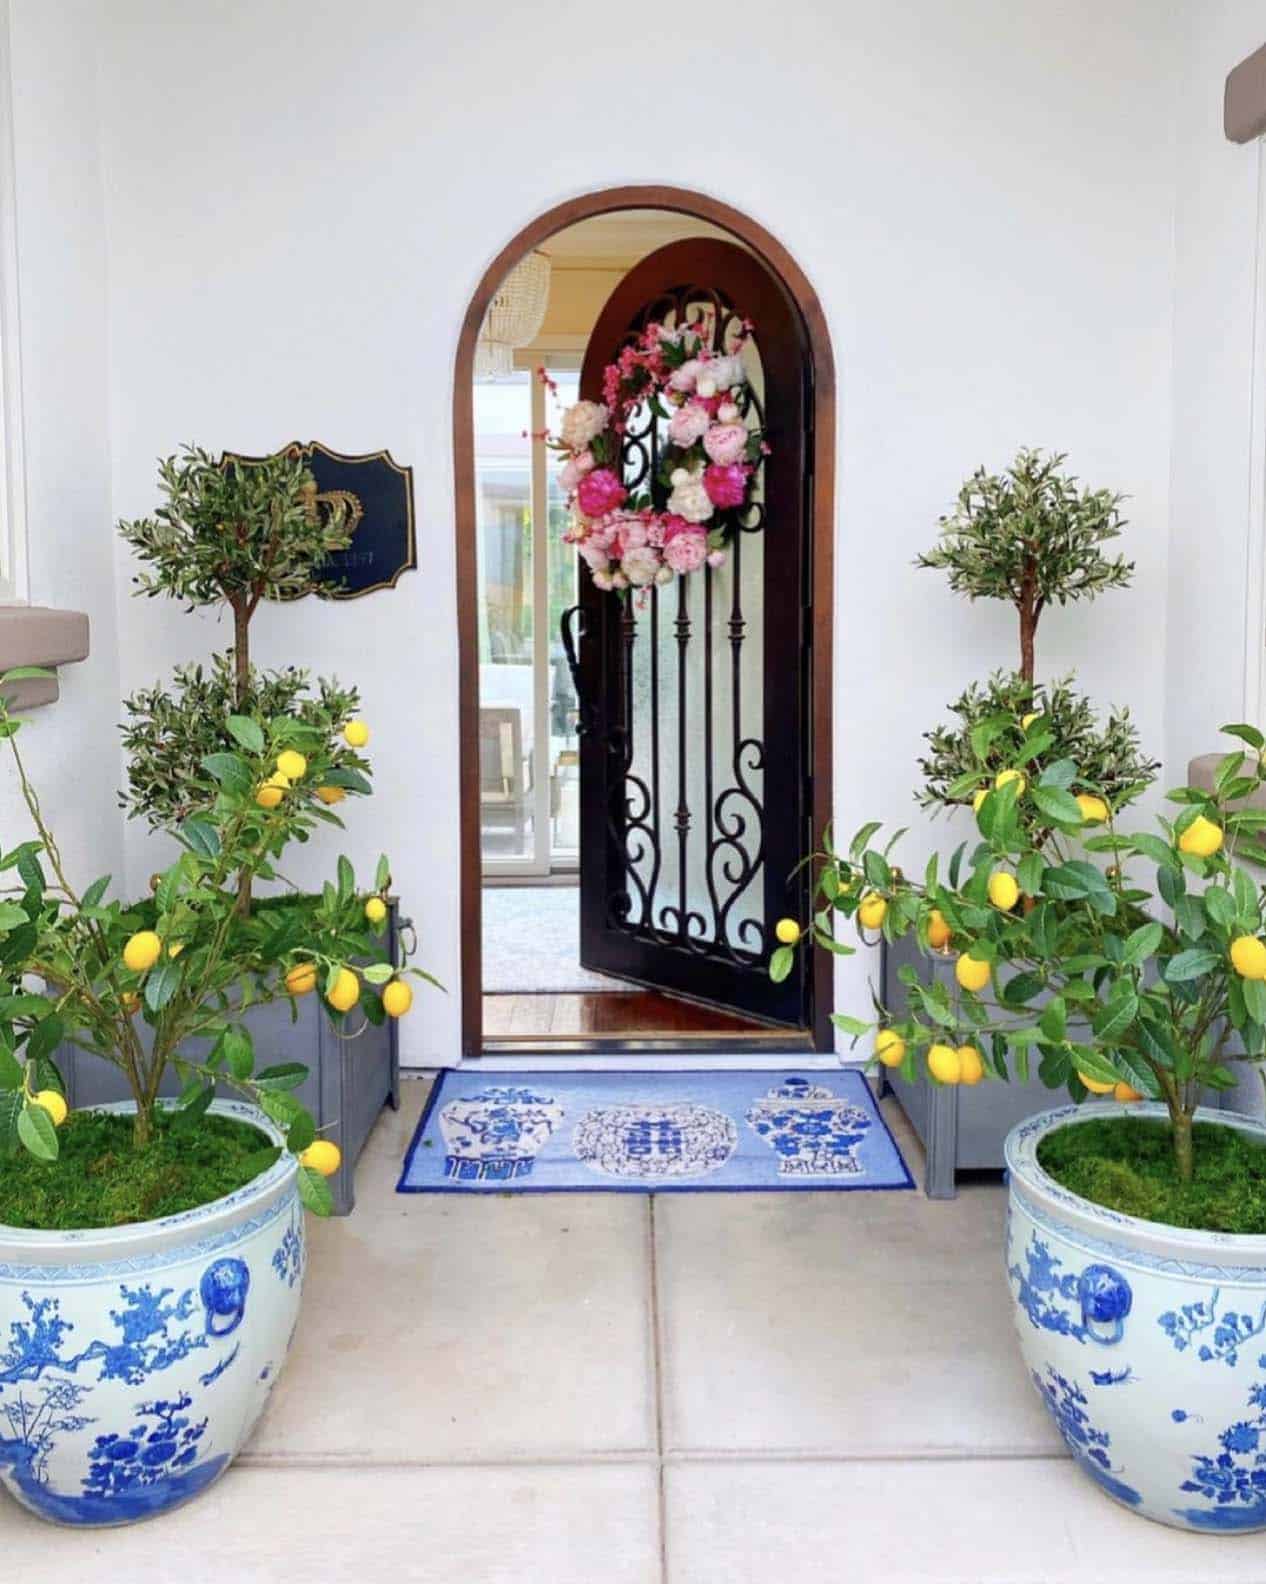 Spring porch decorations in blue and white